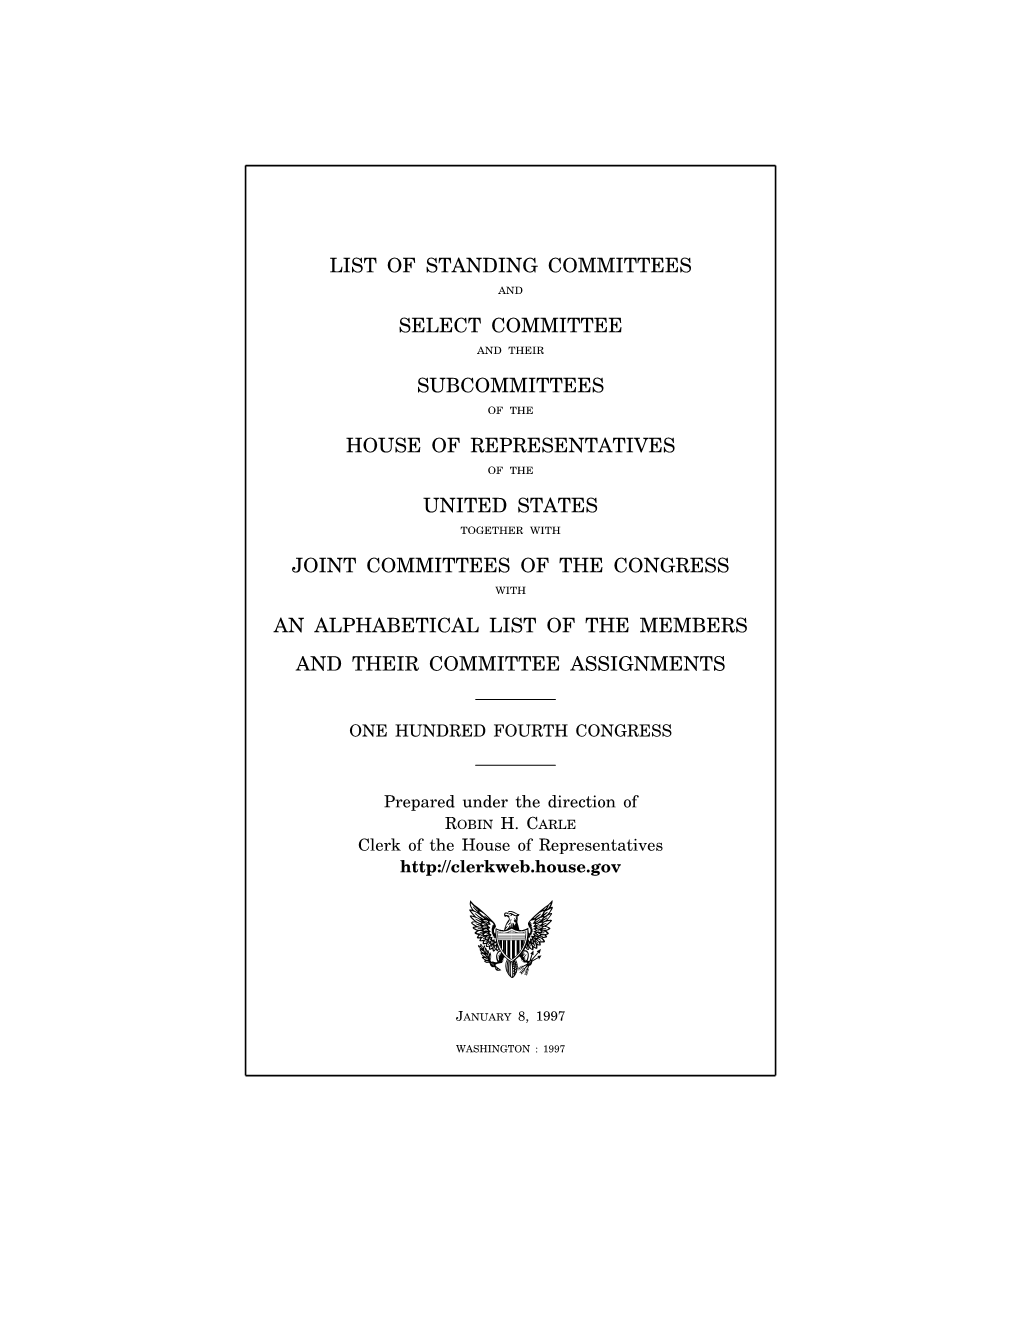 List of Standing Committees And